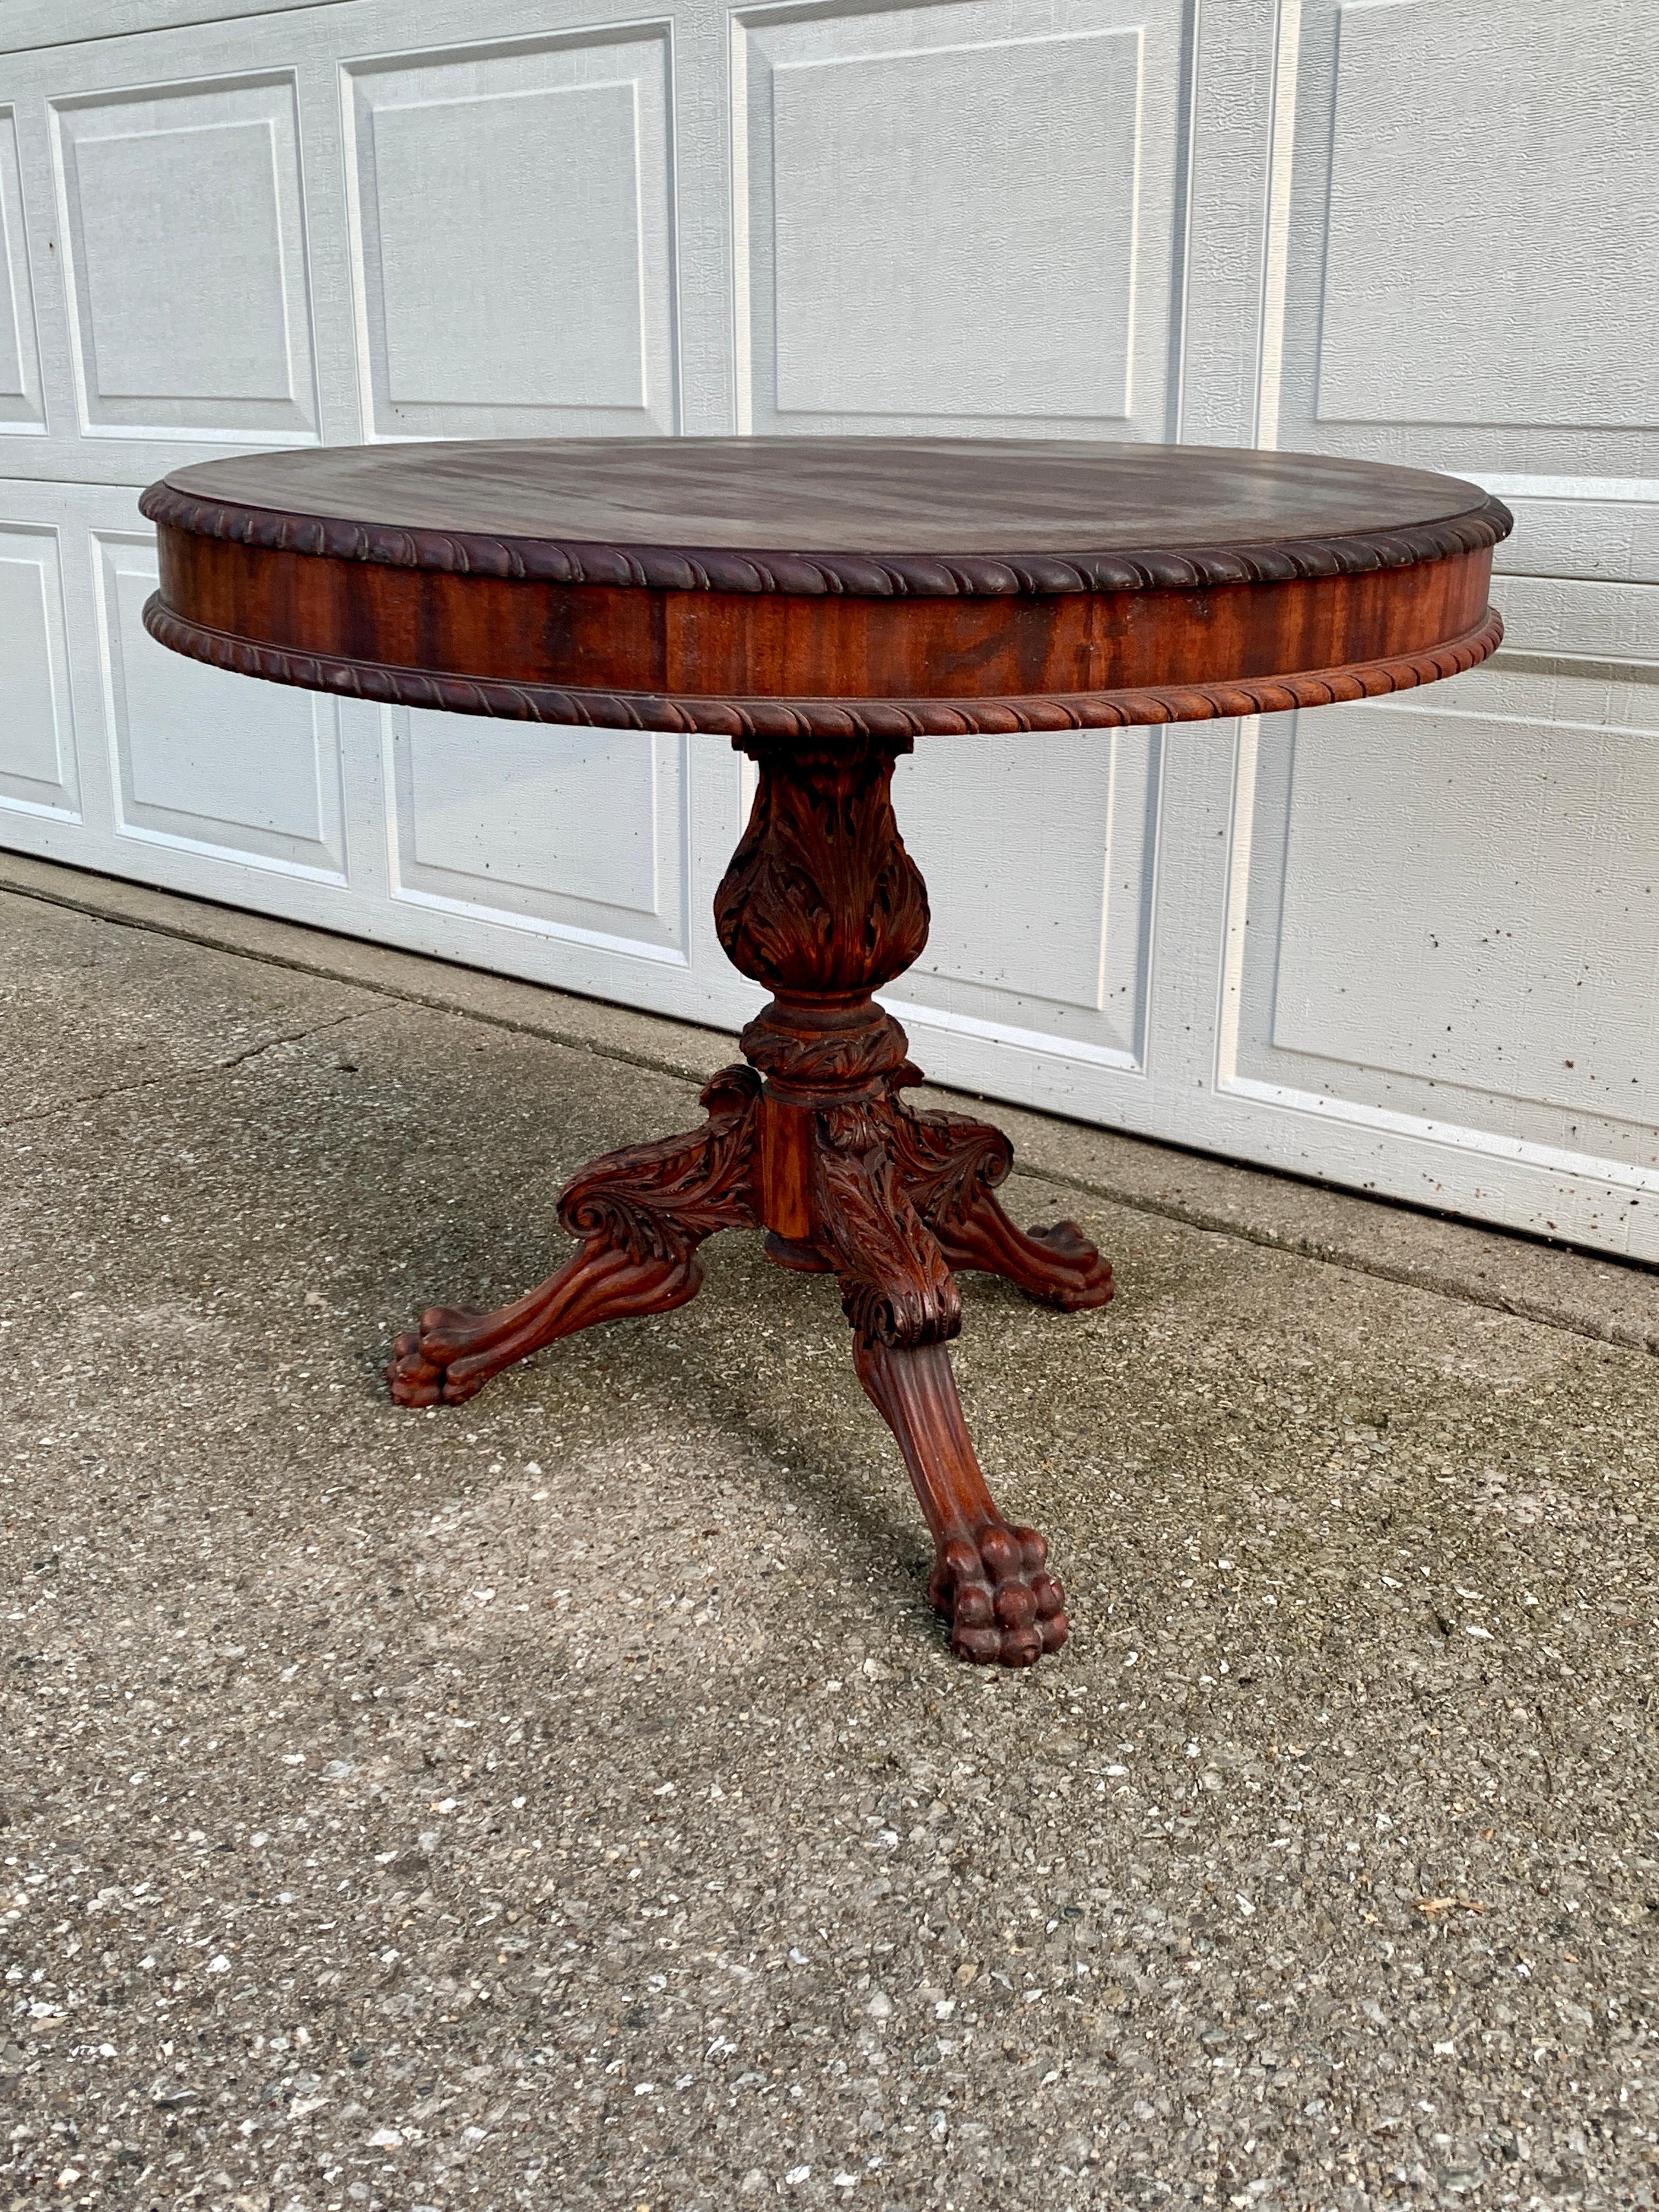 Antique American Empire Mahogany Paw Foot Pedestal Side Table, Late 19th Century For Sale 1